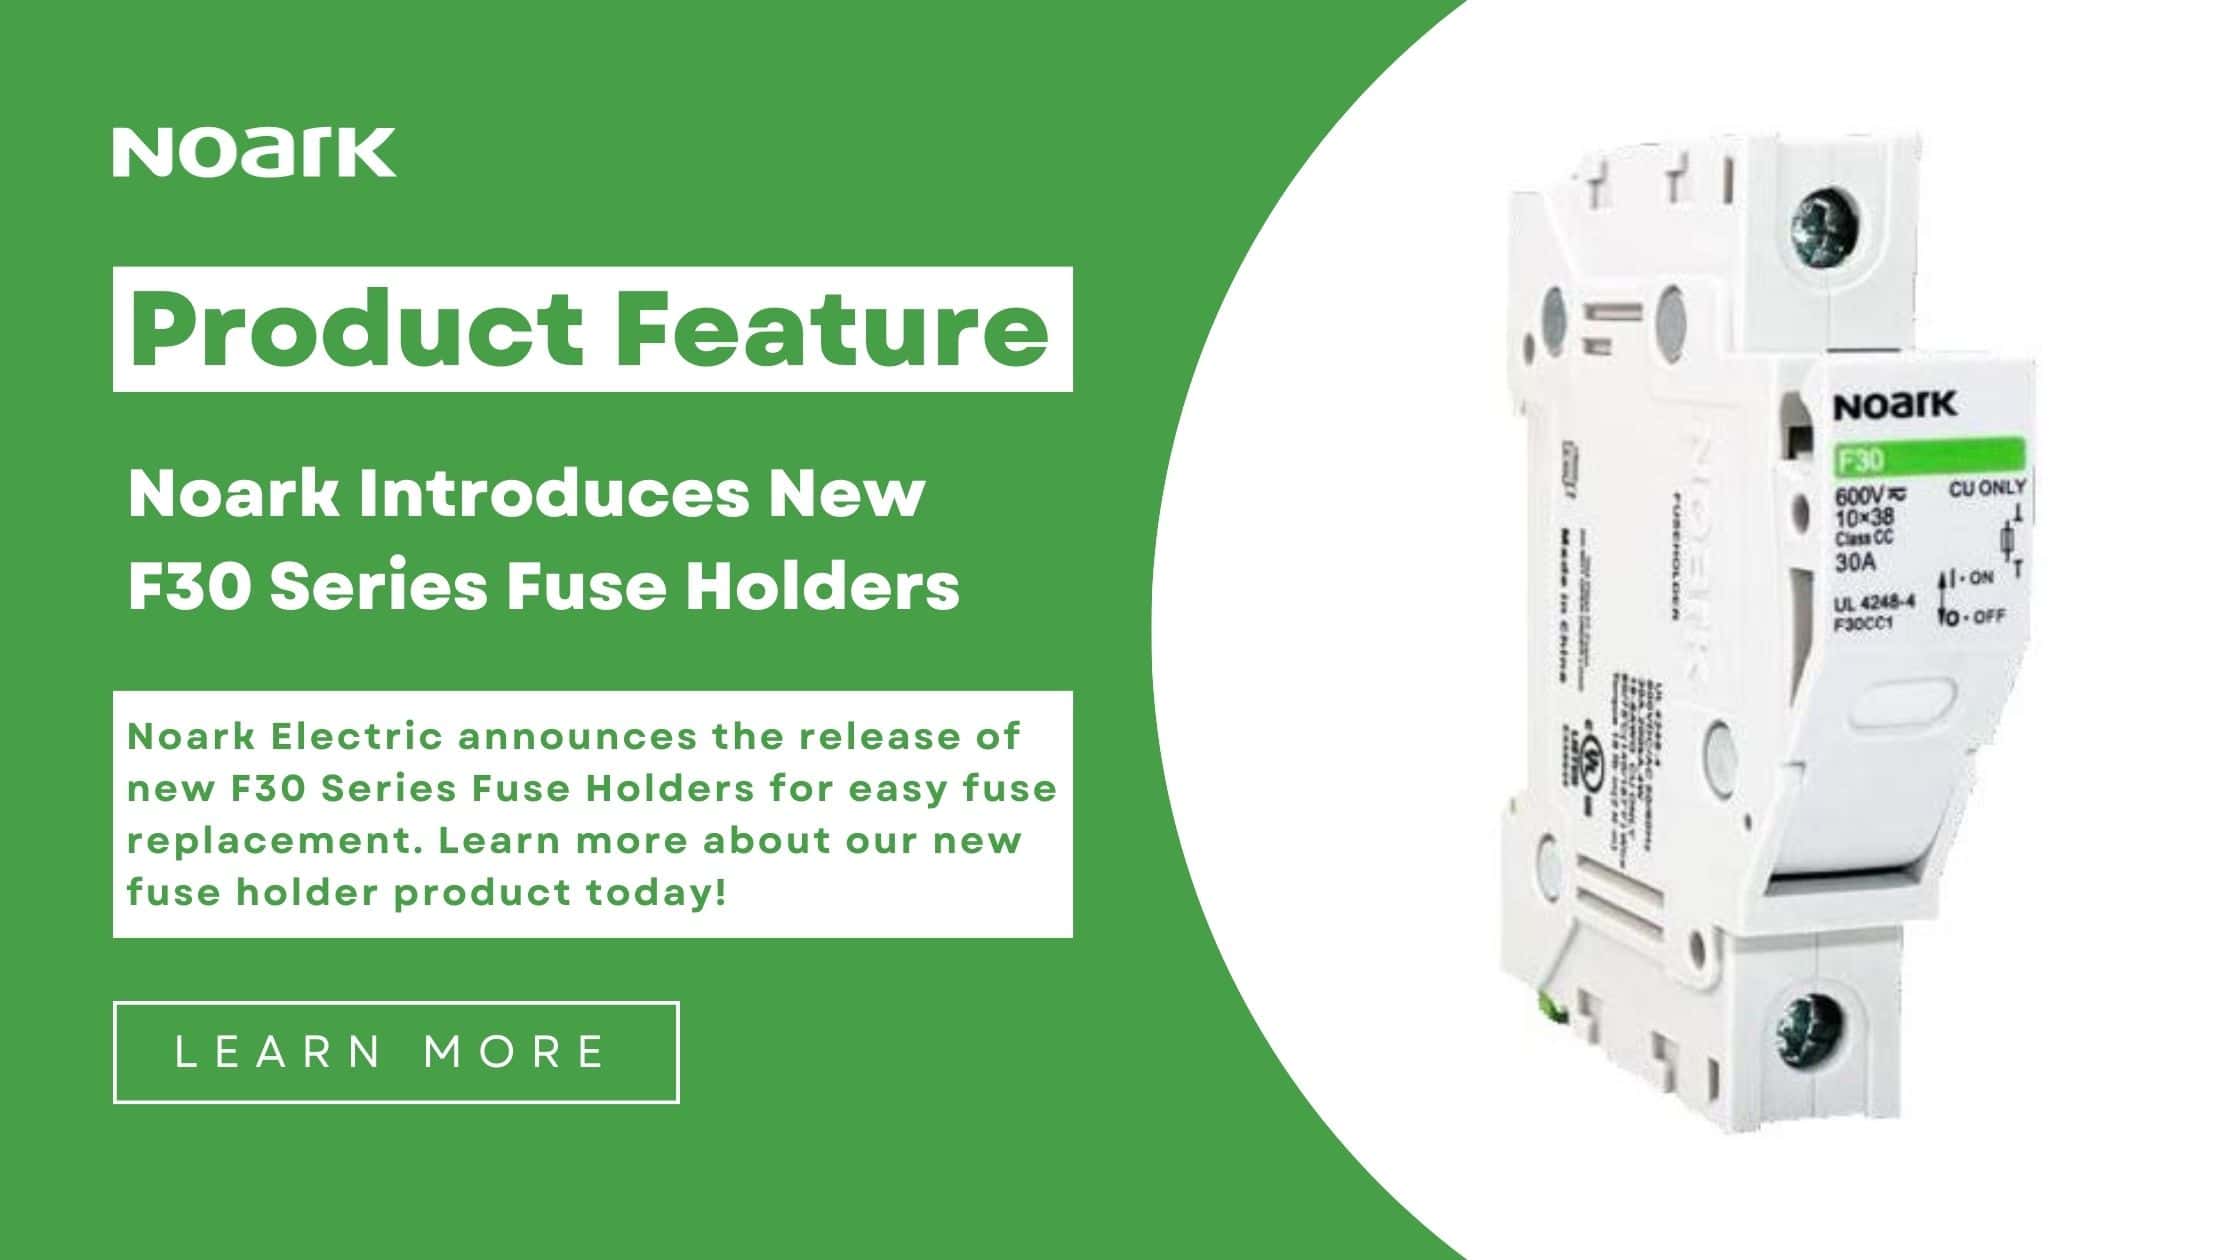 Noark Electric Introduces New F30 Series Fuse Holders